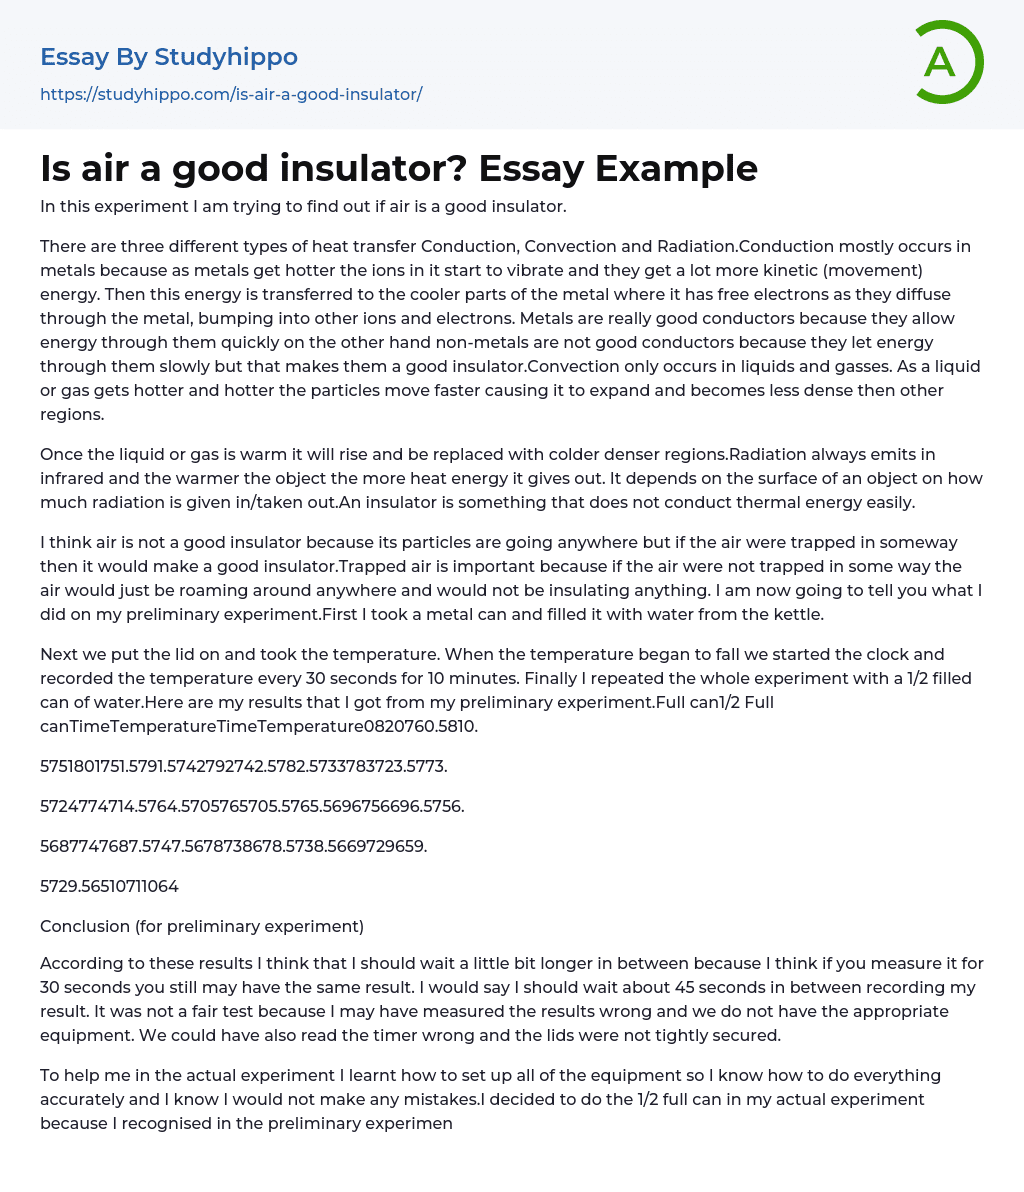 Is air a good insulator? Essay Example